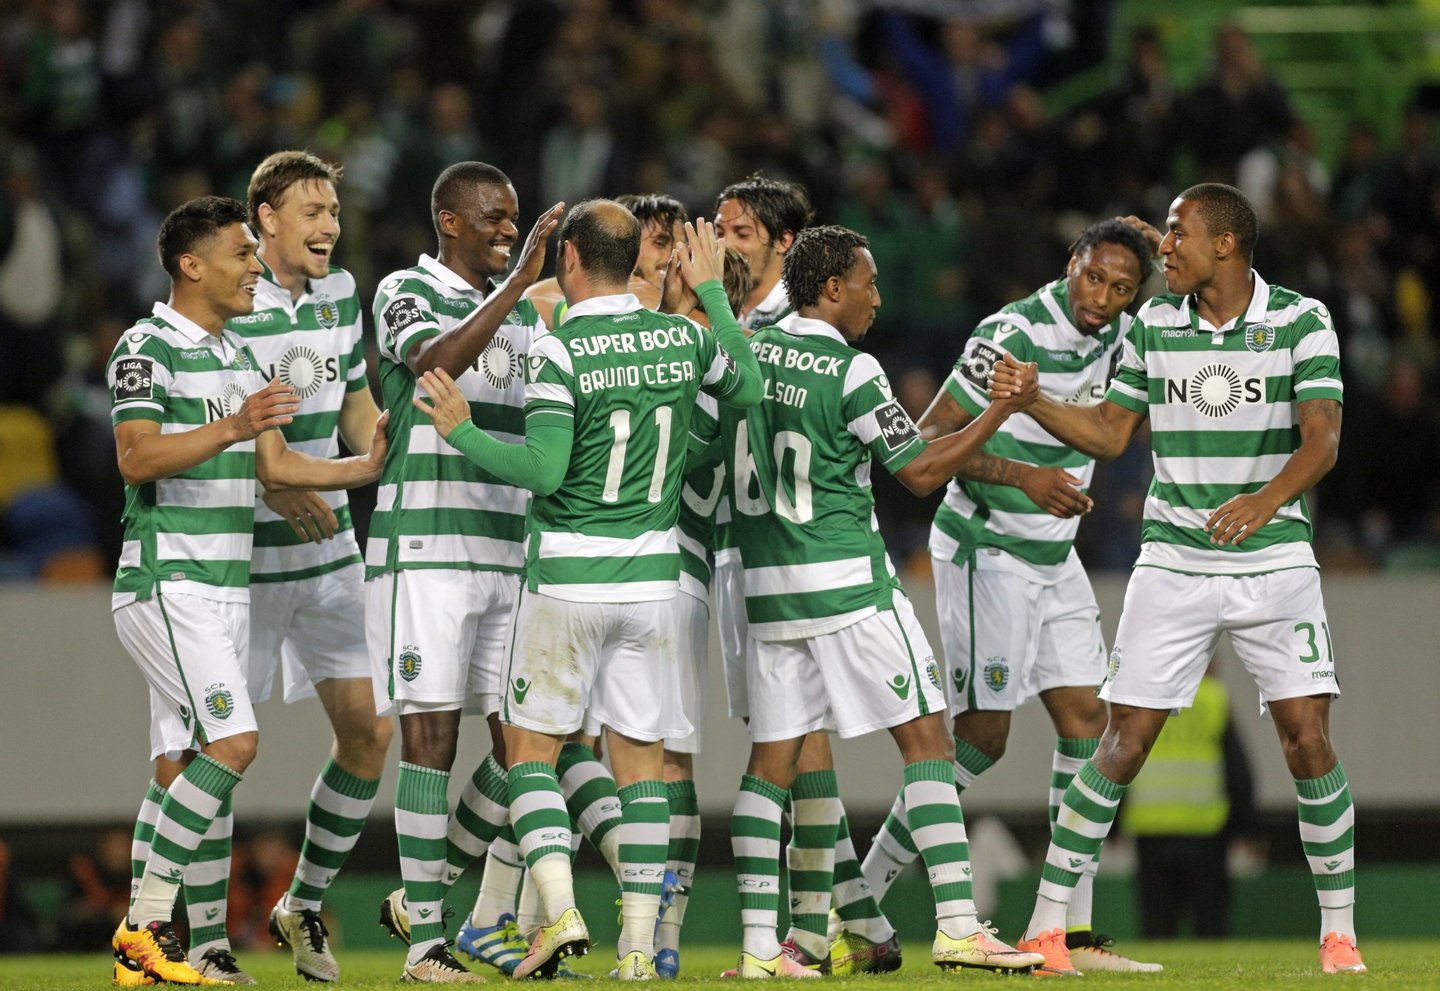 Sporting's players celebrate a goal during the Portuguese league football match Sporting CP vs Vitoria FC at Alvalade stadium in Lisbon on May 7, 2016. / AFP / JOSE MANUEL RIBEIRO (Photo credit should read JOSE MANUEL RIBEIRO/AFP/Getty Images)